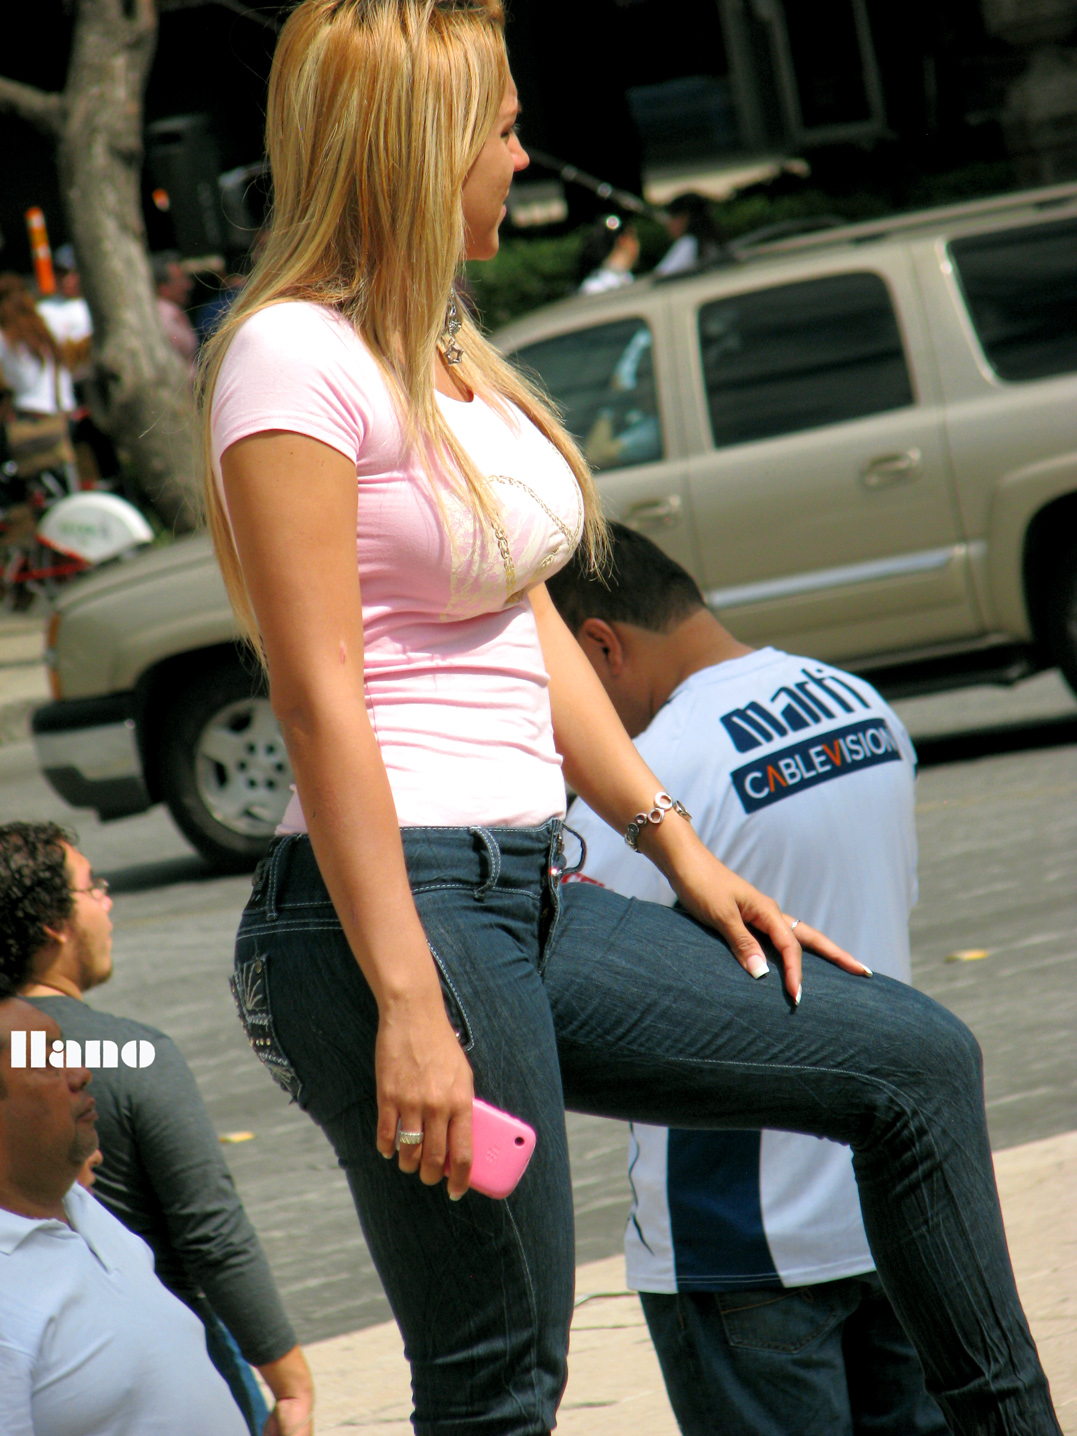 Perfect Bubble Butts Candid Jeans Divine Butts Candid